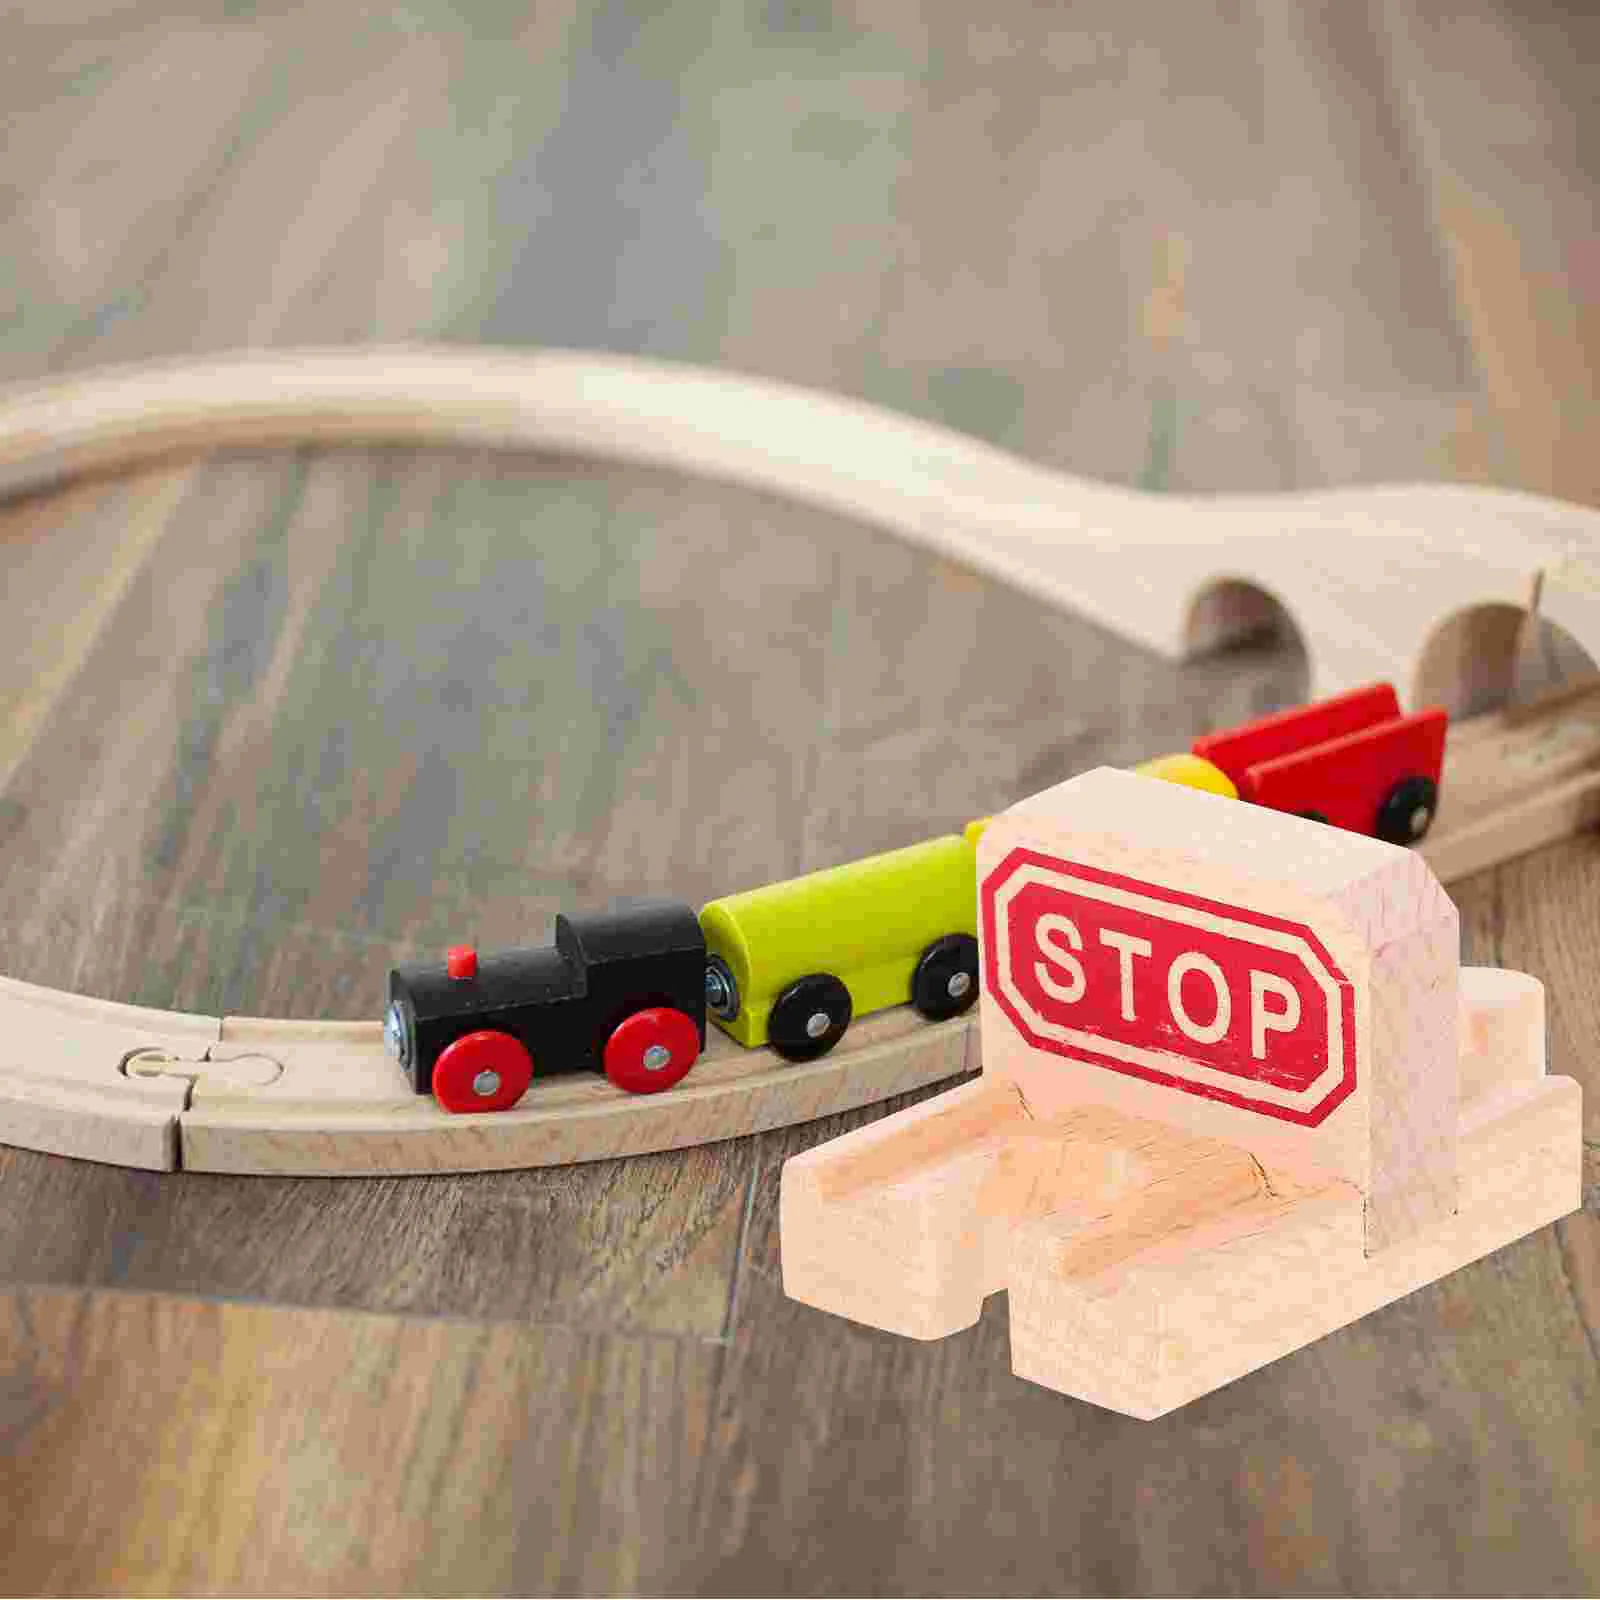 2Pcs Wooden Train Track Toy Railway Expansion Stop Track Train Toy Accessory slot car carrera go 1 43 straight track expansion accessory